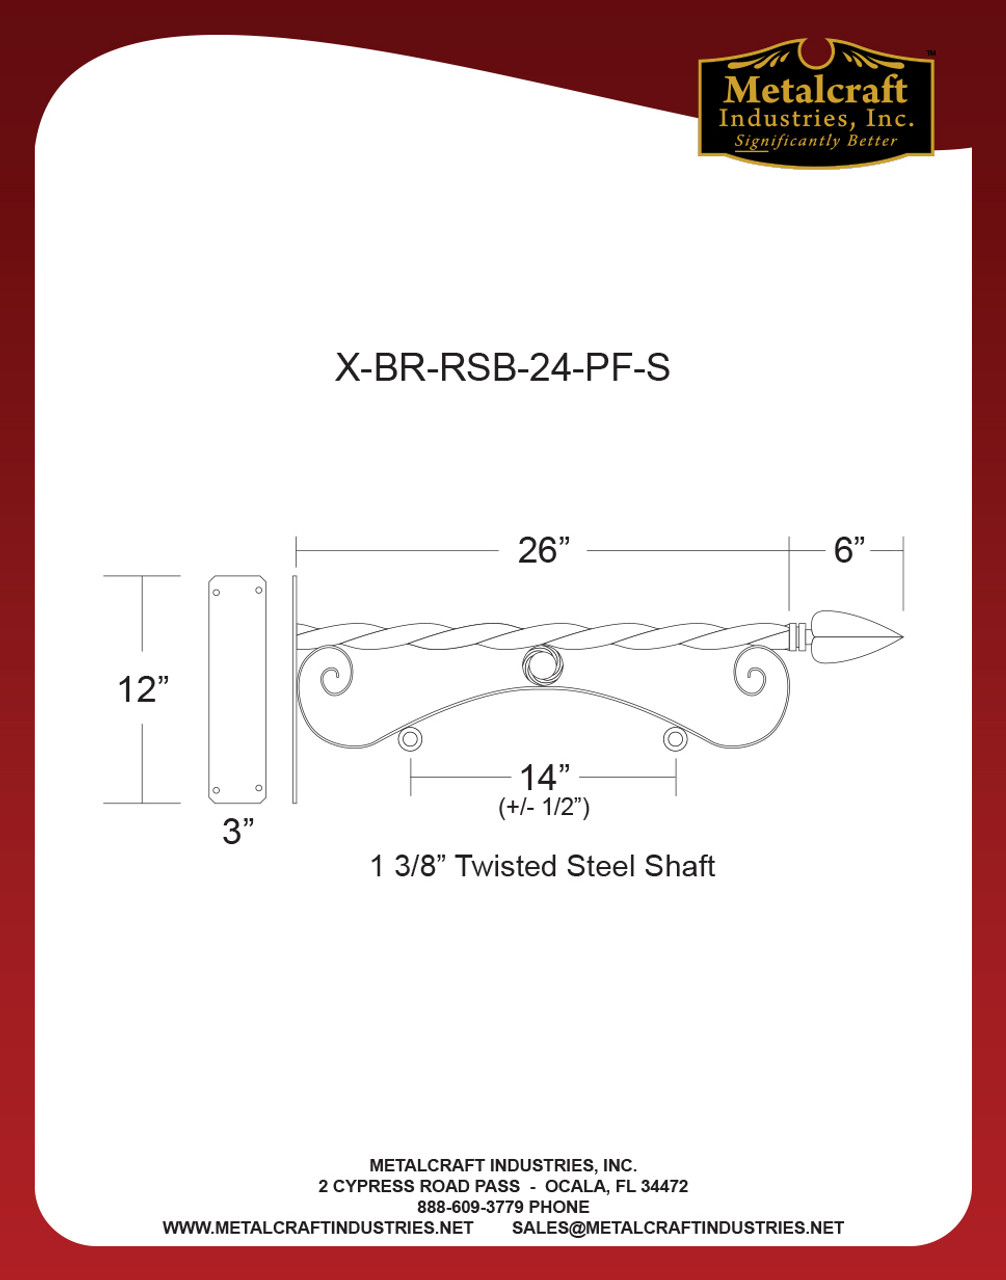 Specification drawing for item# X-BR-RSB-24-PF-S